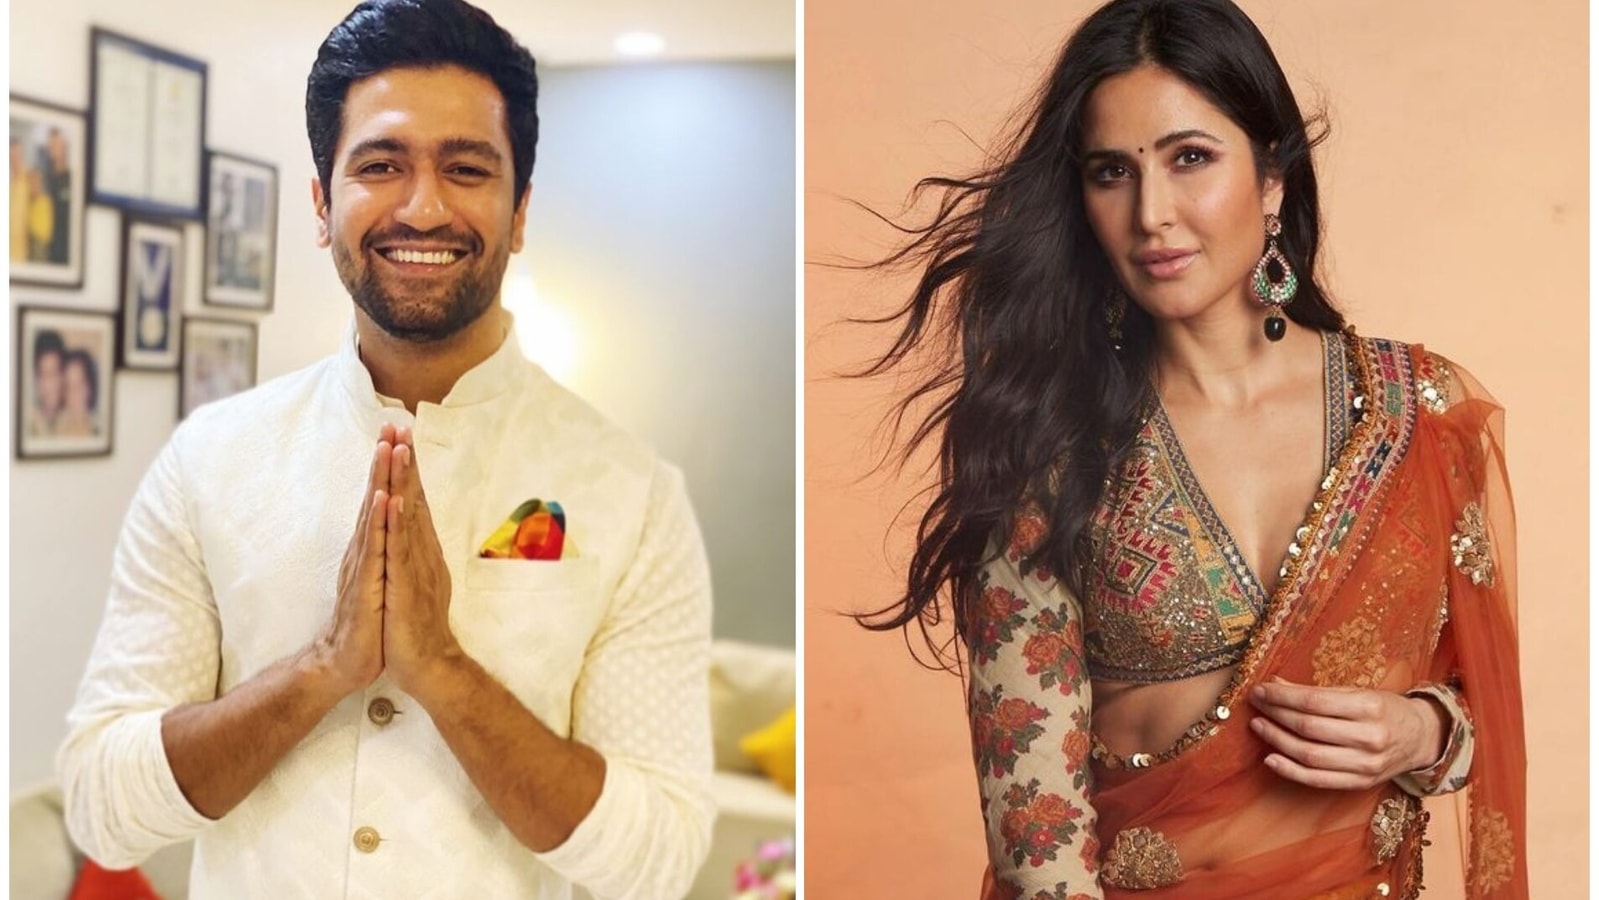 Katrina Ki Cudai - Katrina Kaif reacts to reports of her winter wedding with Vicky Kaushal,  speculates about reason behind rumours | Bollywood - Hindustan Times